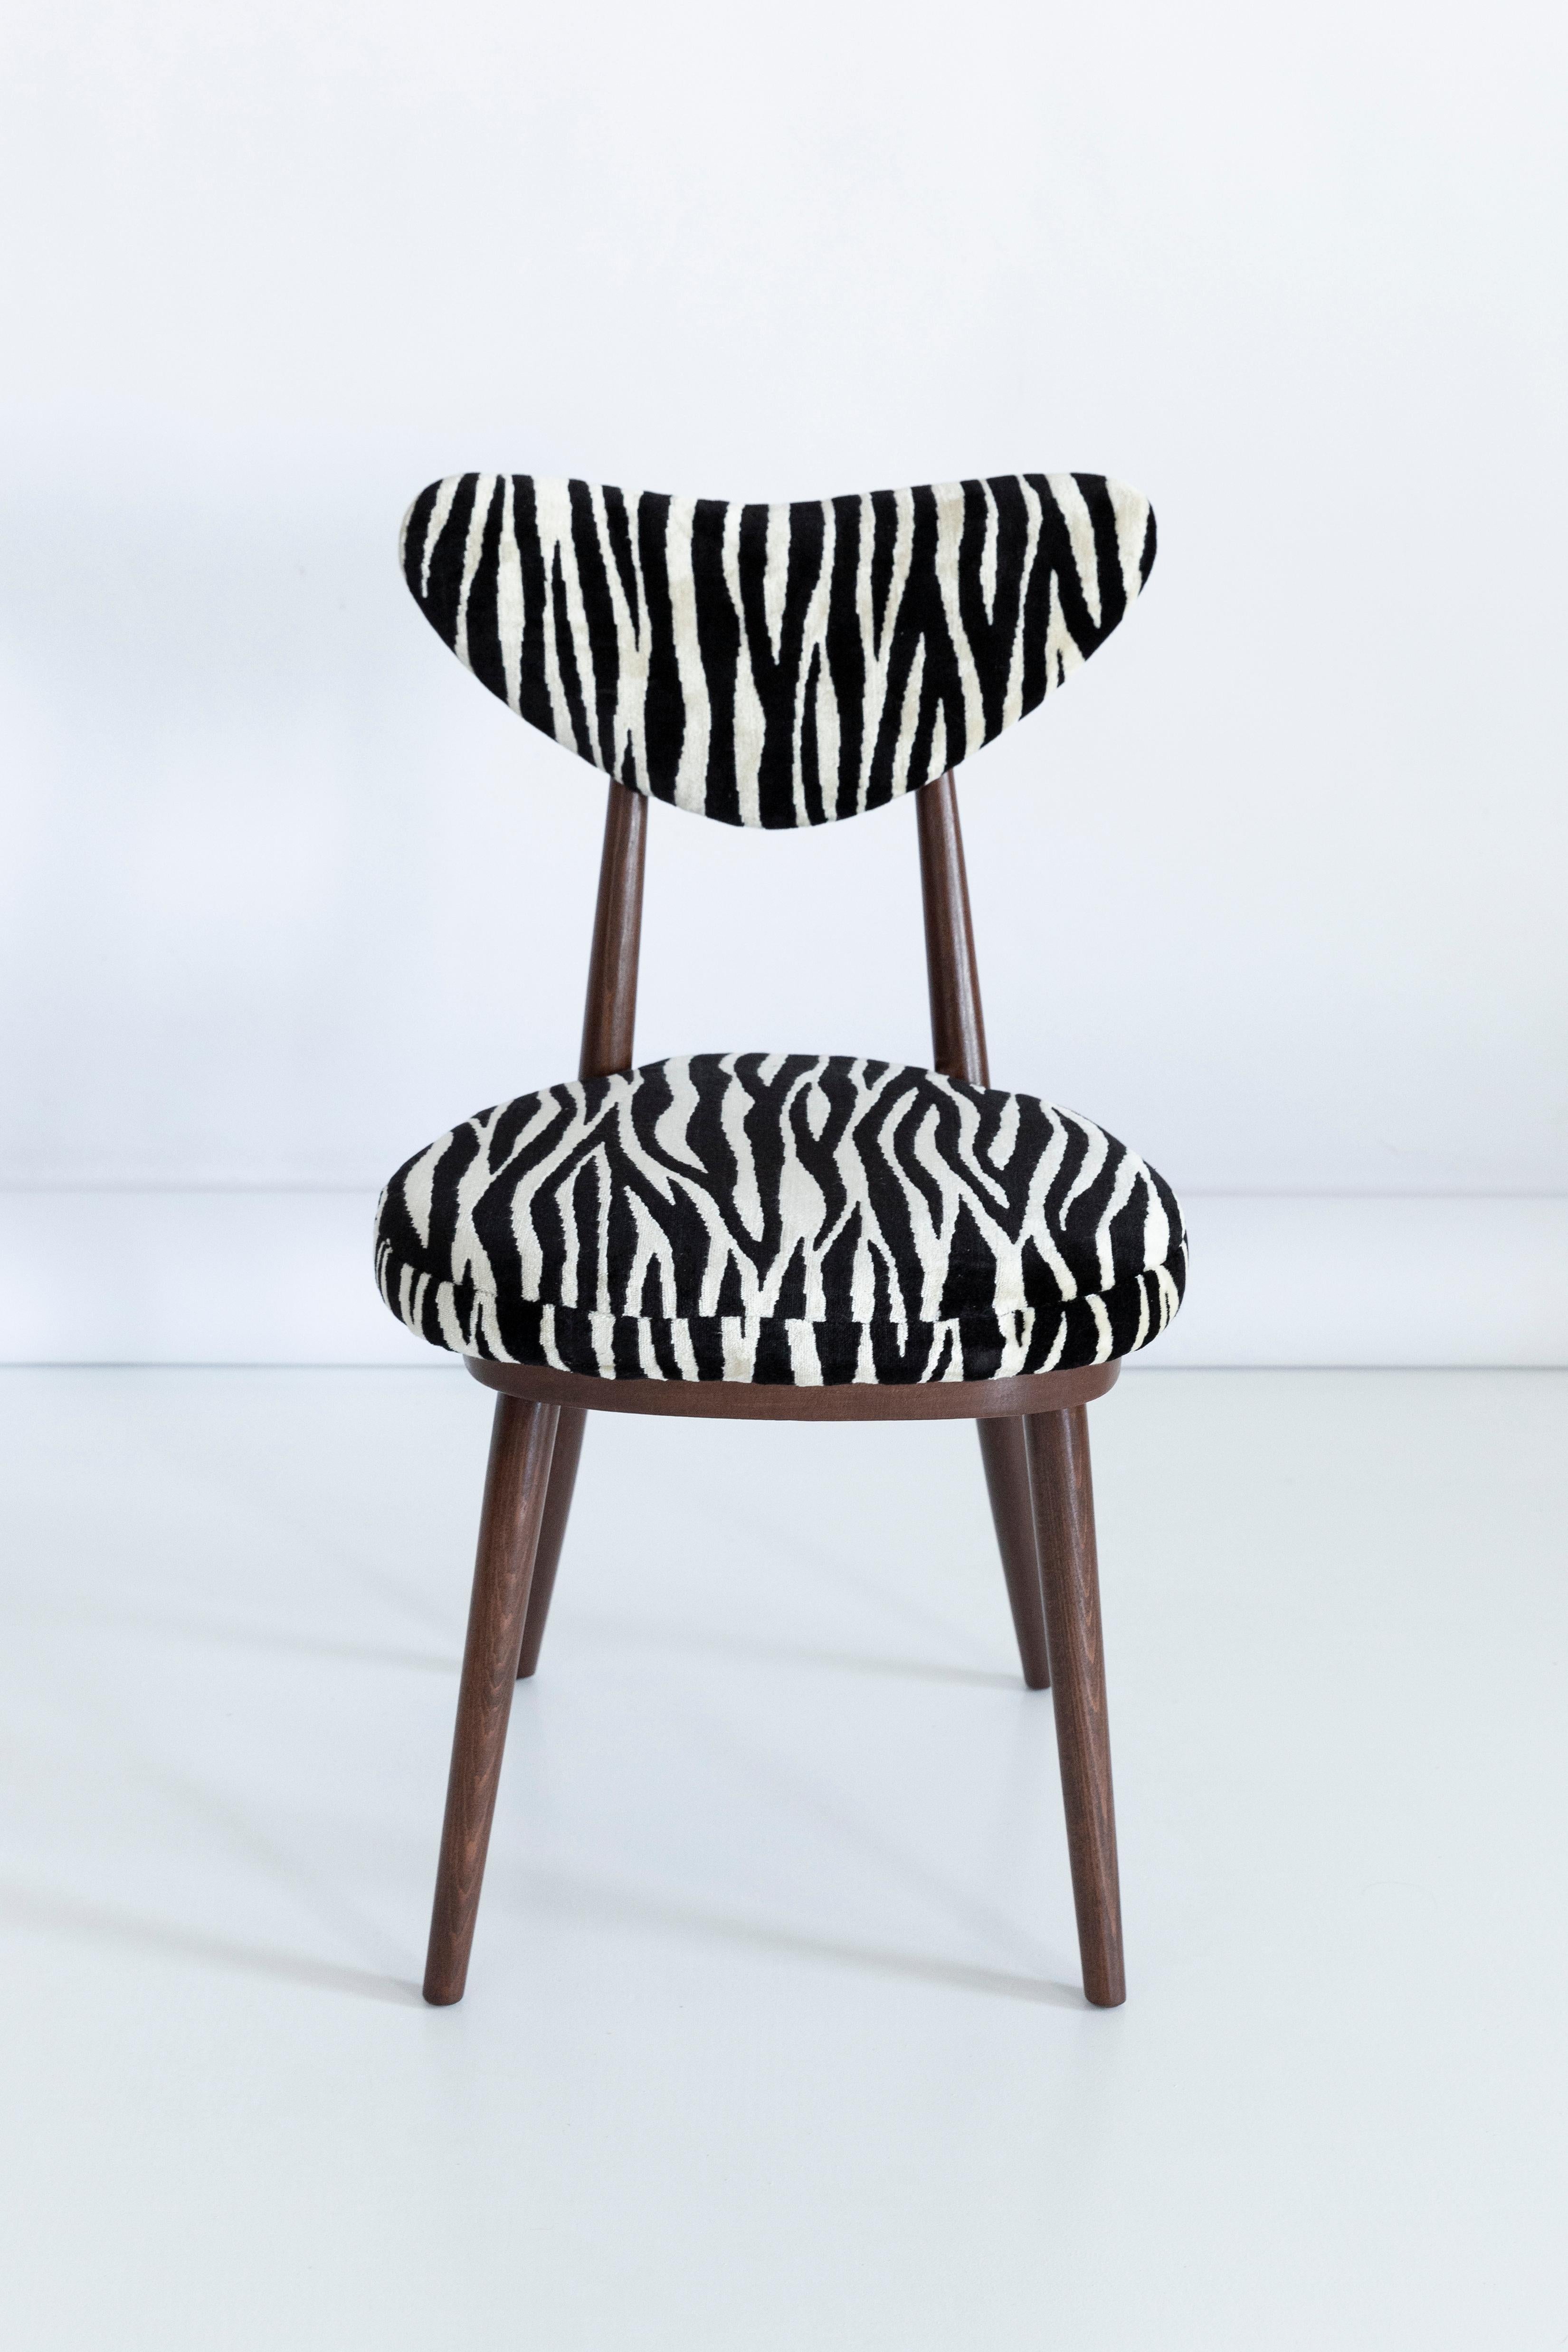 Set of Six Midcentury Zebra Black and White Heart Chairs, Poland, 1960s For Sale 9